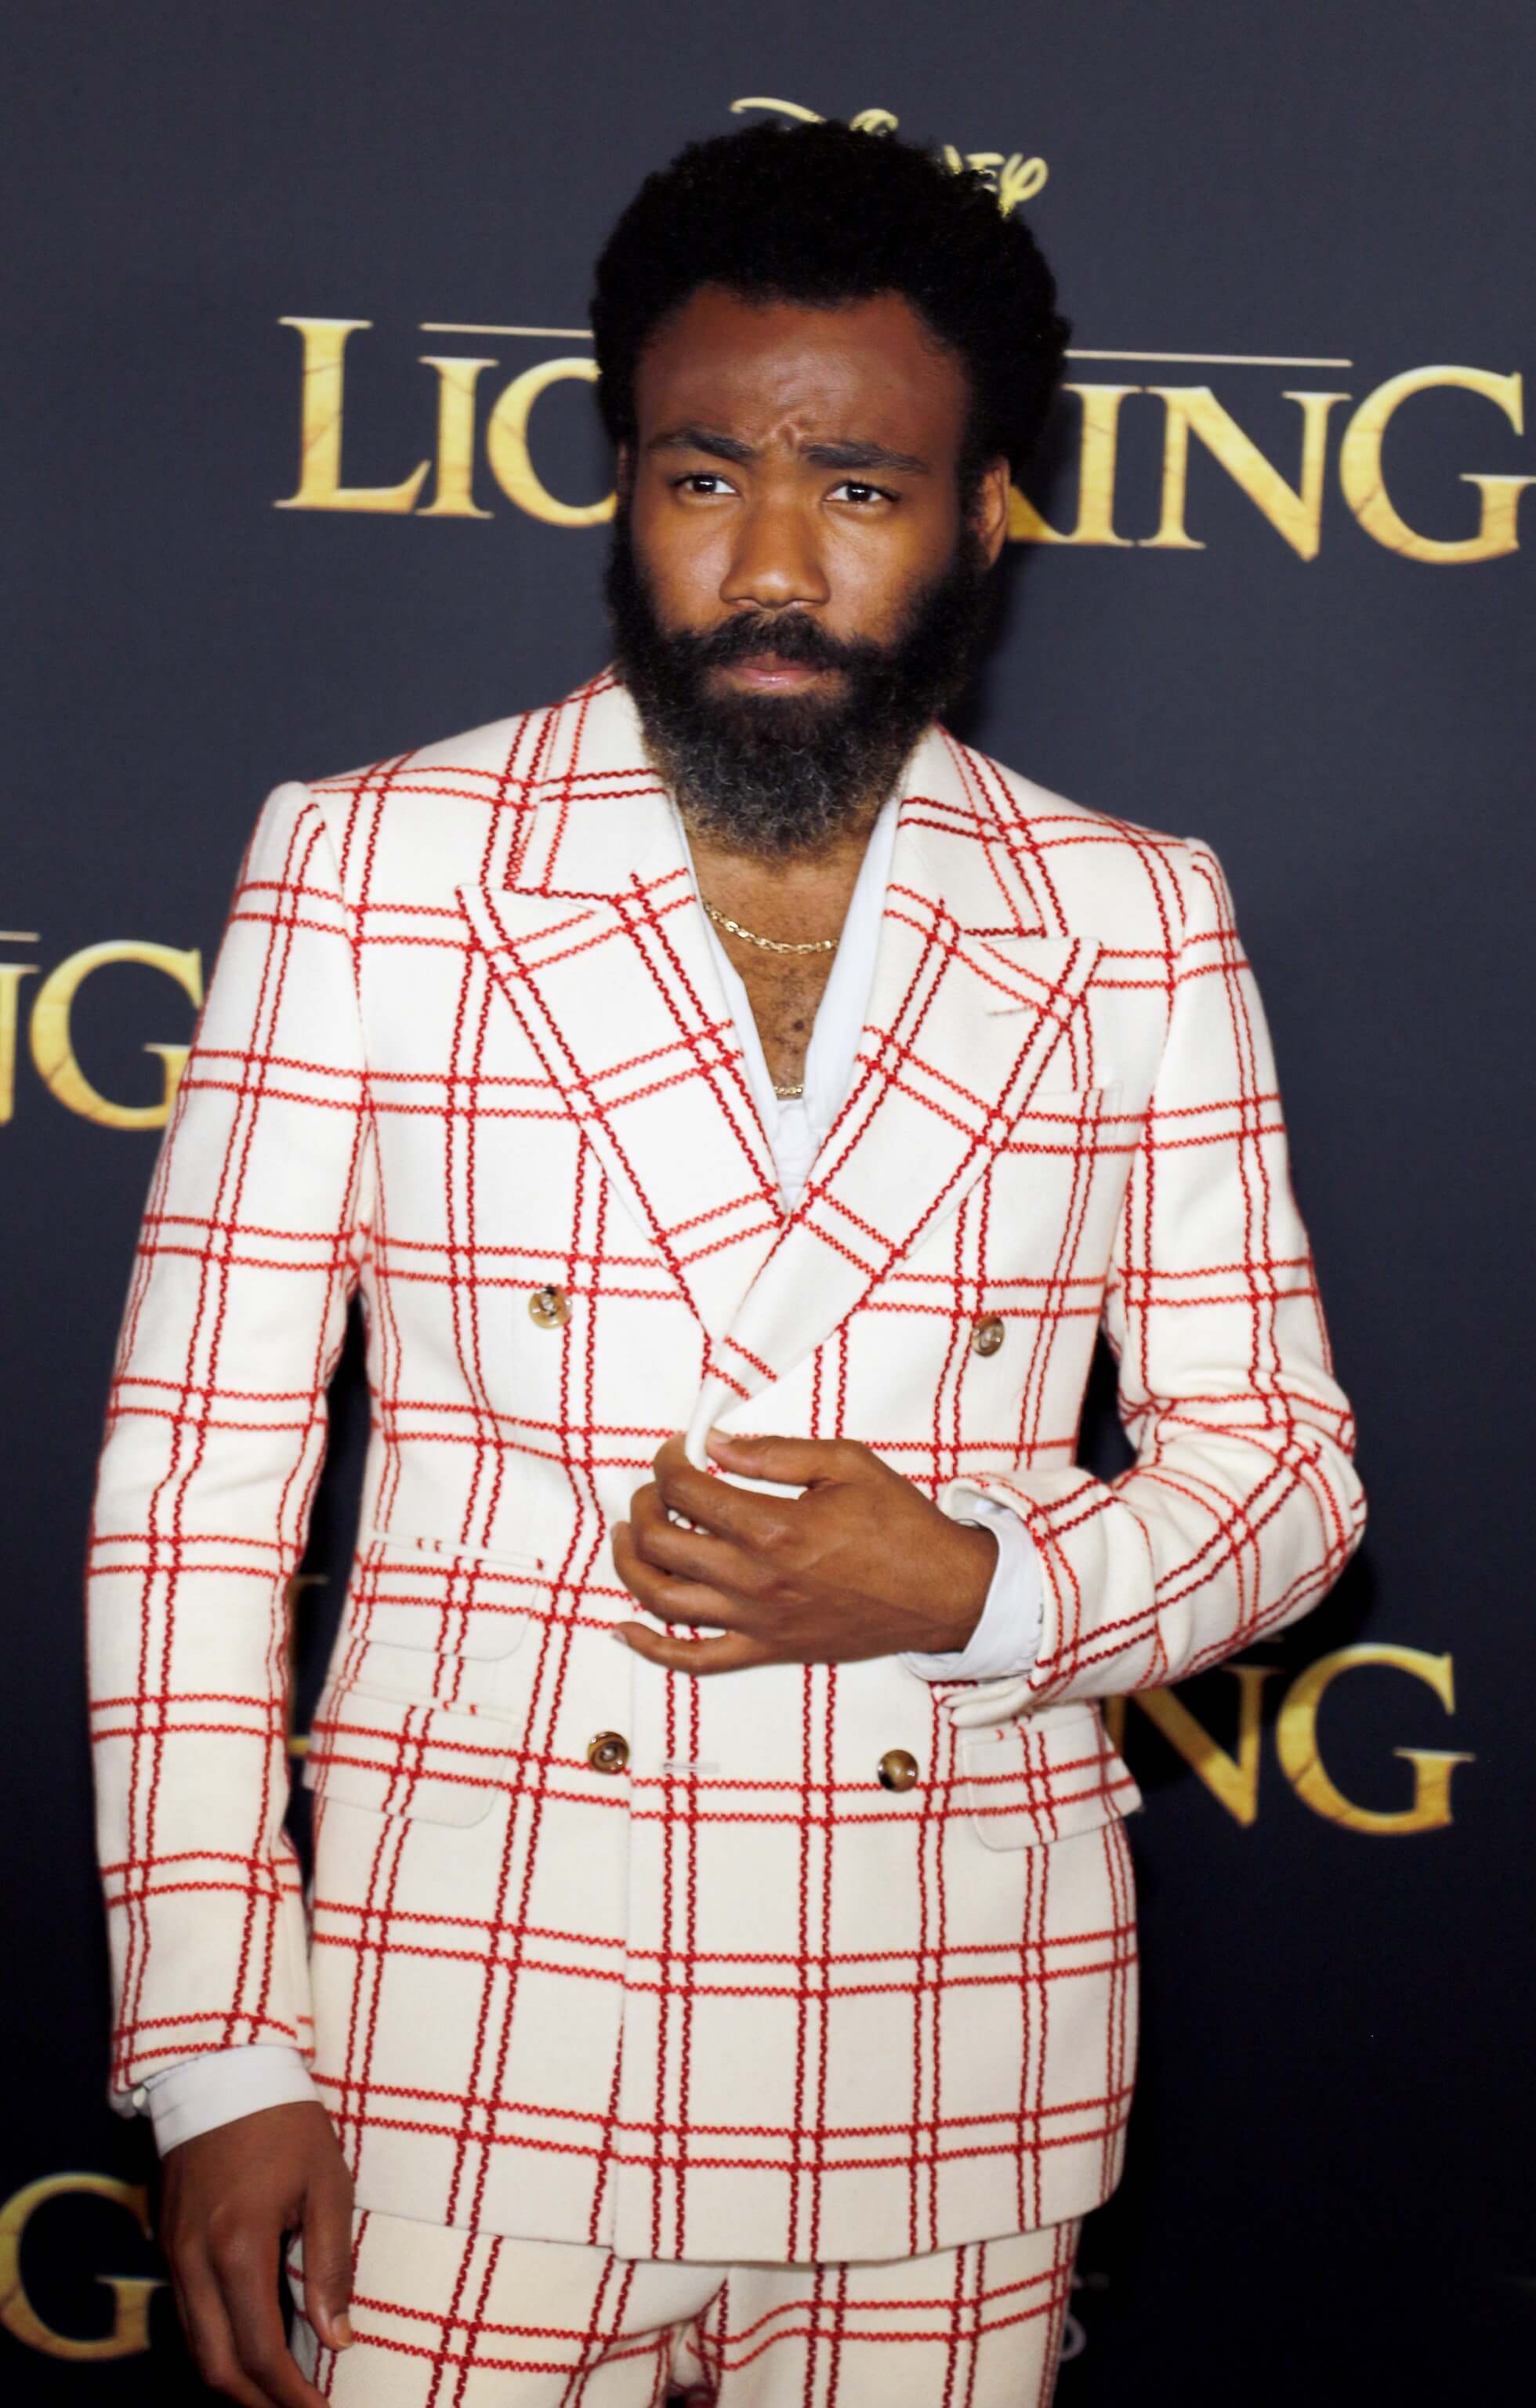 Donald Glover at the World premiere